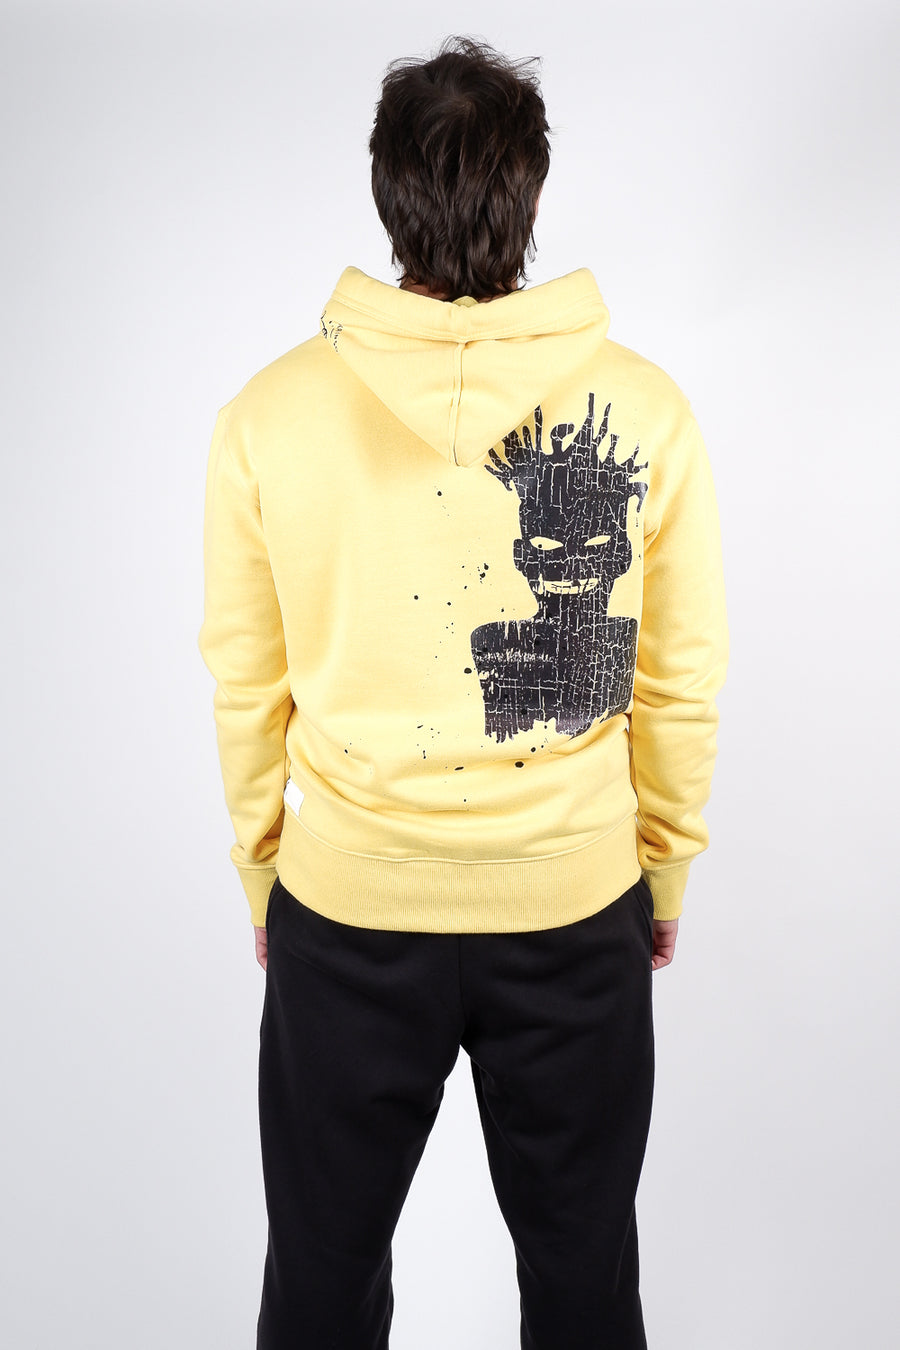 Buy the ABE King Pleasure Hoodie in Yellow at Intro. Spend £50 for free UK delivery. Official stockists. We ship worldwide.